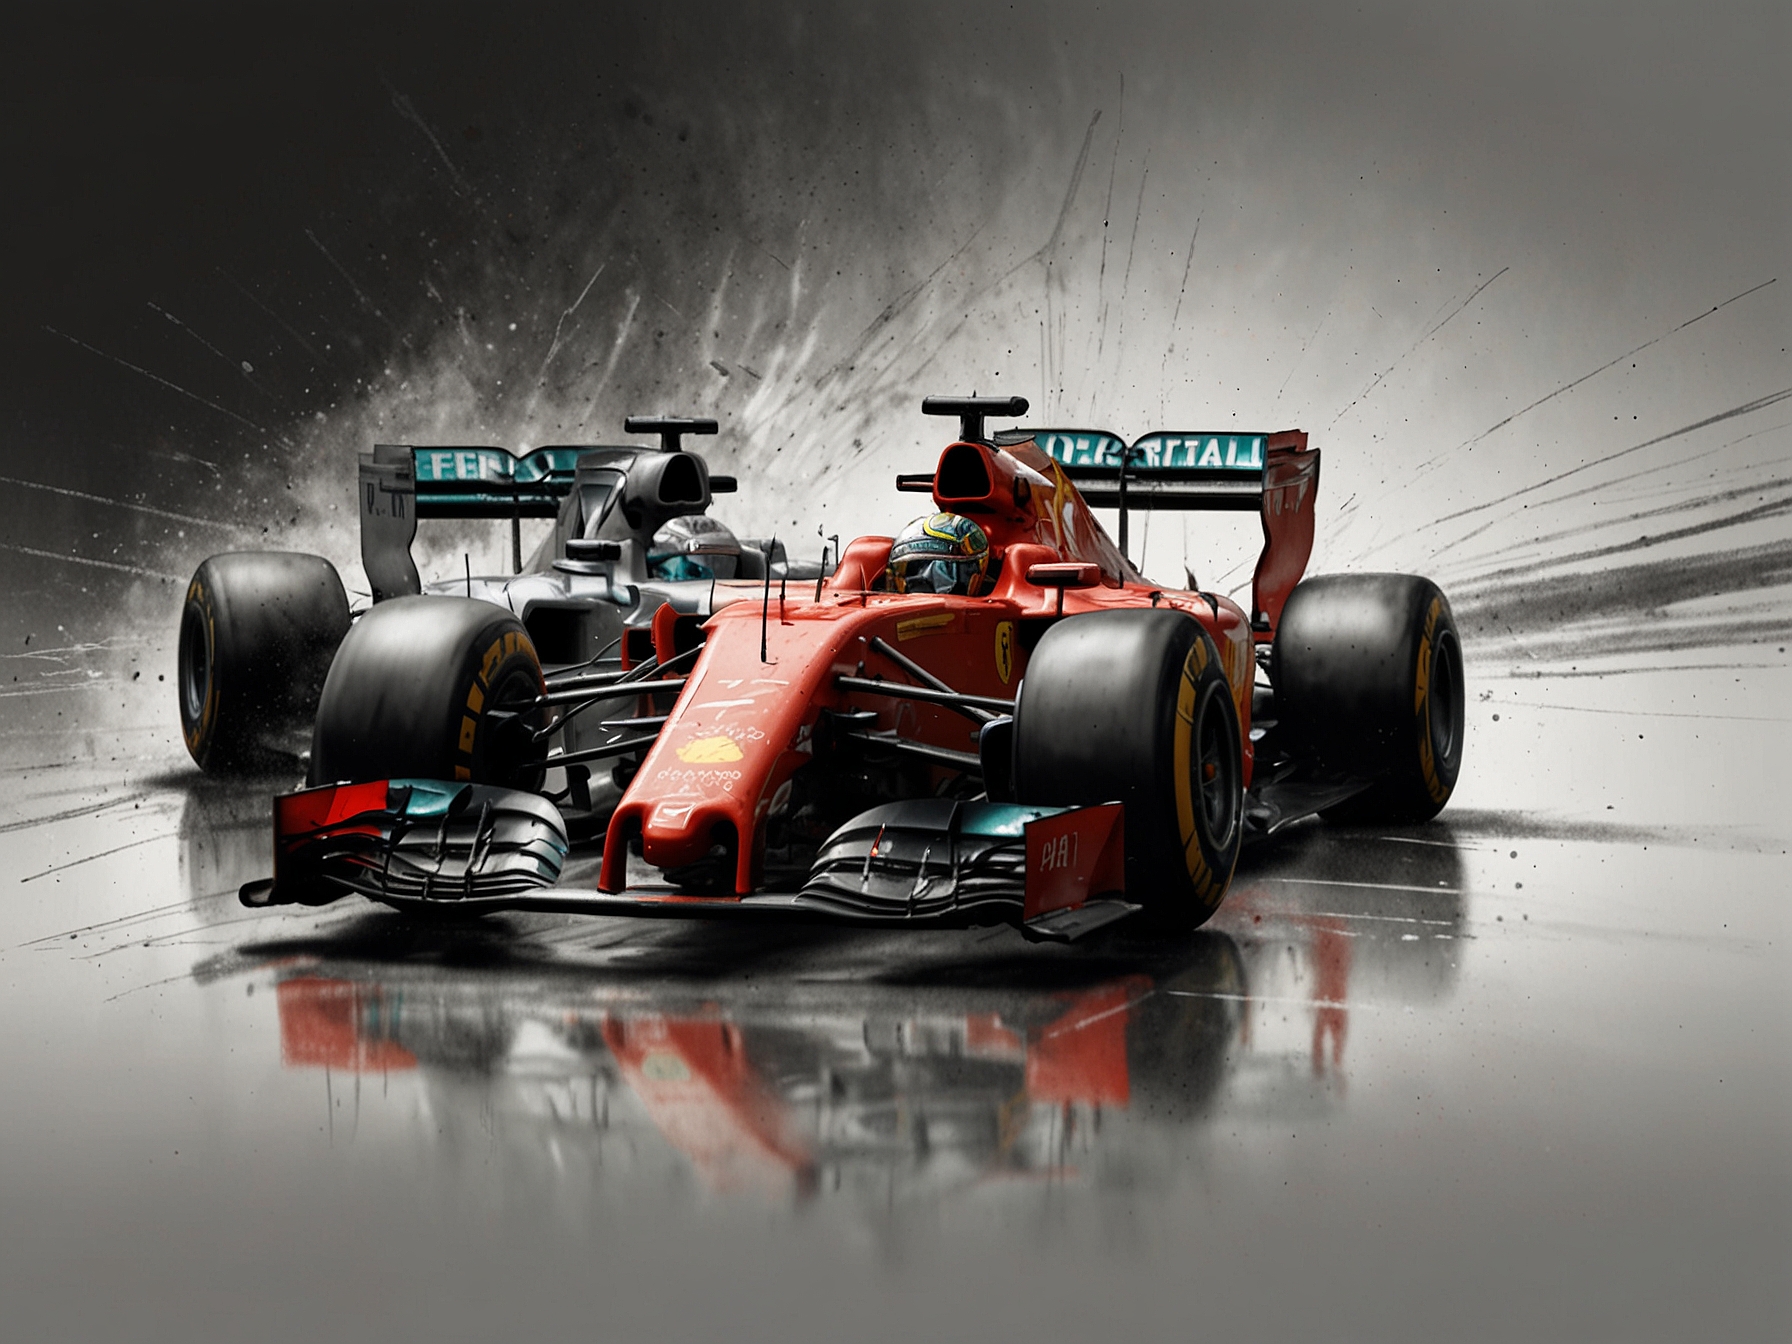 Depiction of two F1 cars, one Mercedes and one Ferrari, representing the potential shift in loyalty and the brewing tensions within the teams.